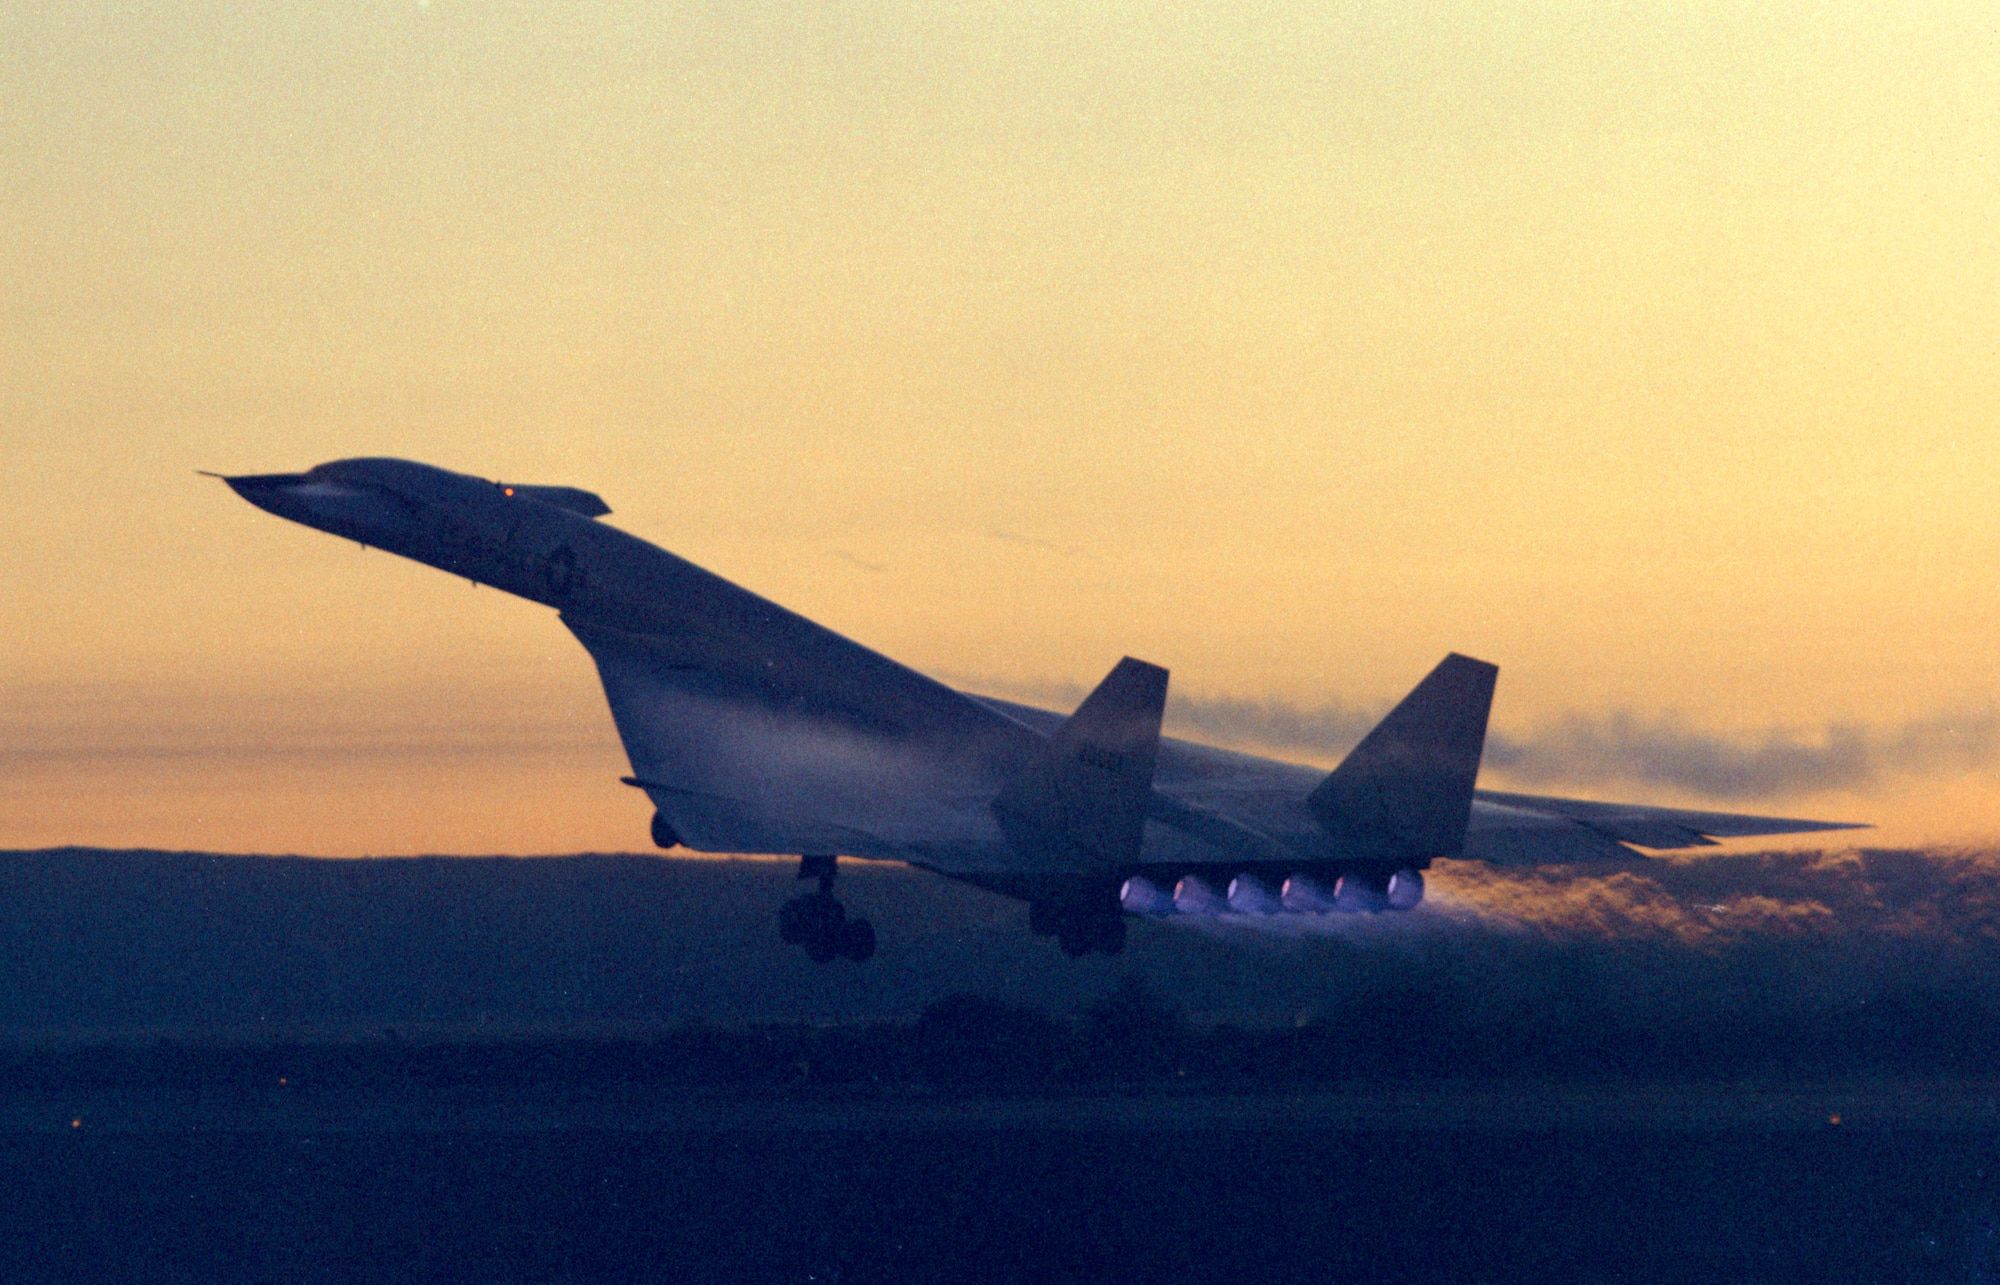 North American XB-70 Valkyrie Taking Off In The Sunset